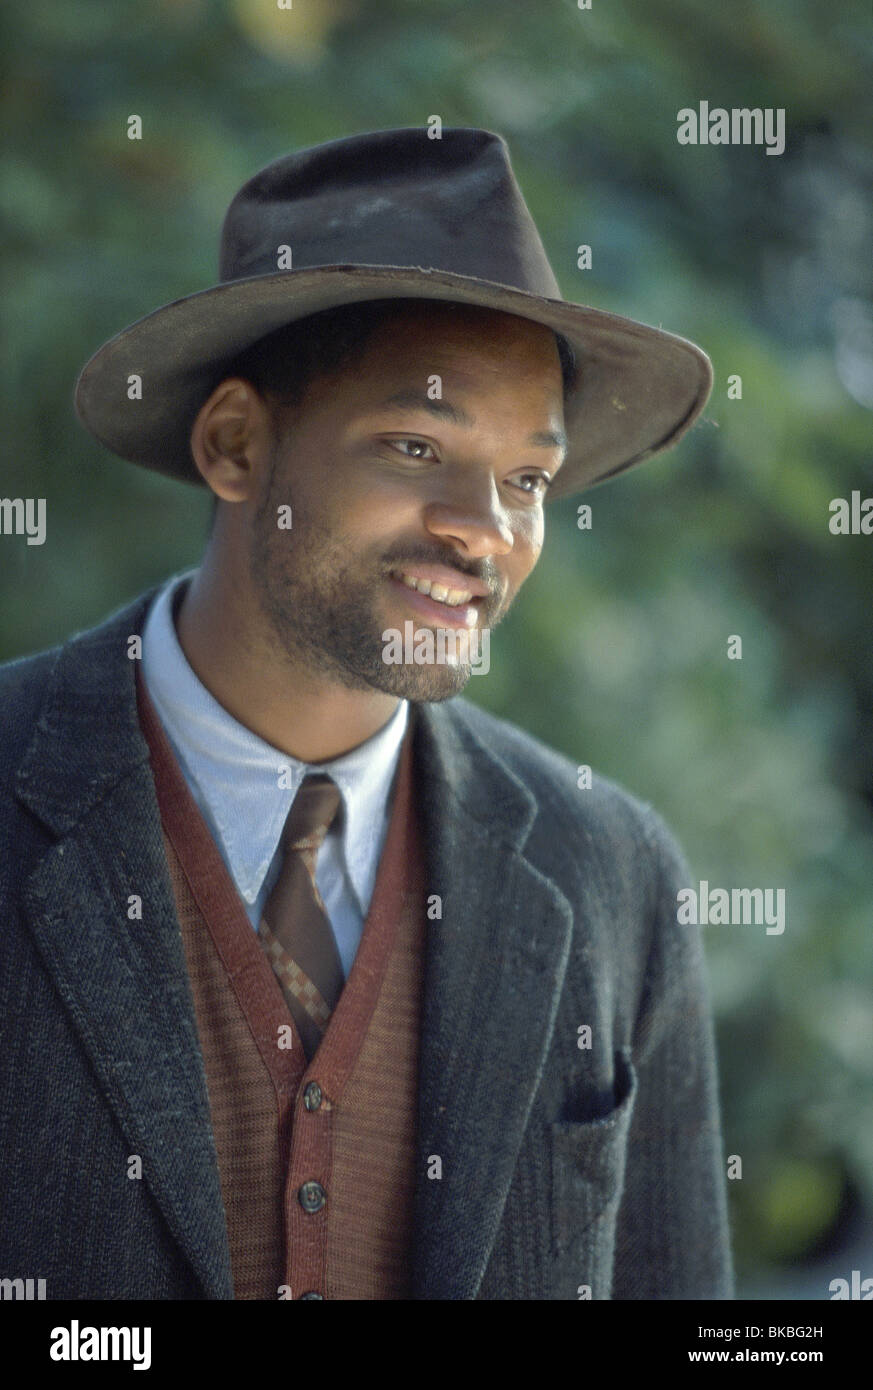 THE LEGEND OF BAGGER VANCE (2000) WILL SMITH BAGG 001 5417 Stock Photo